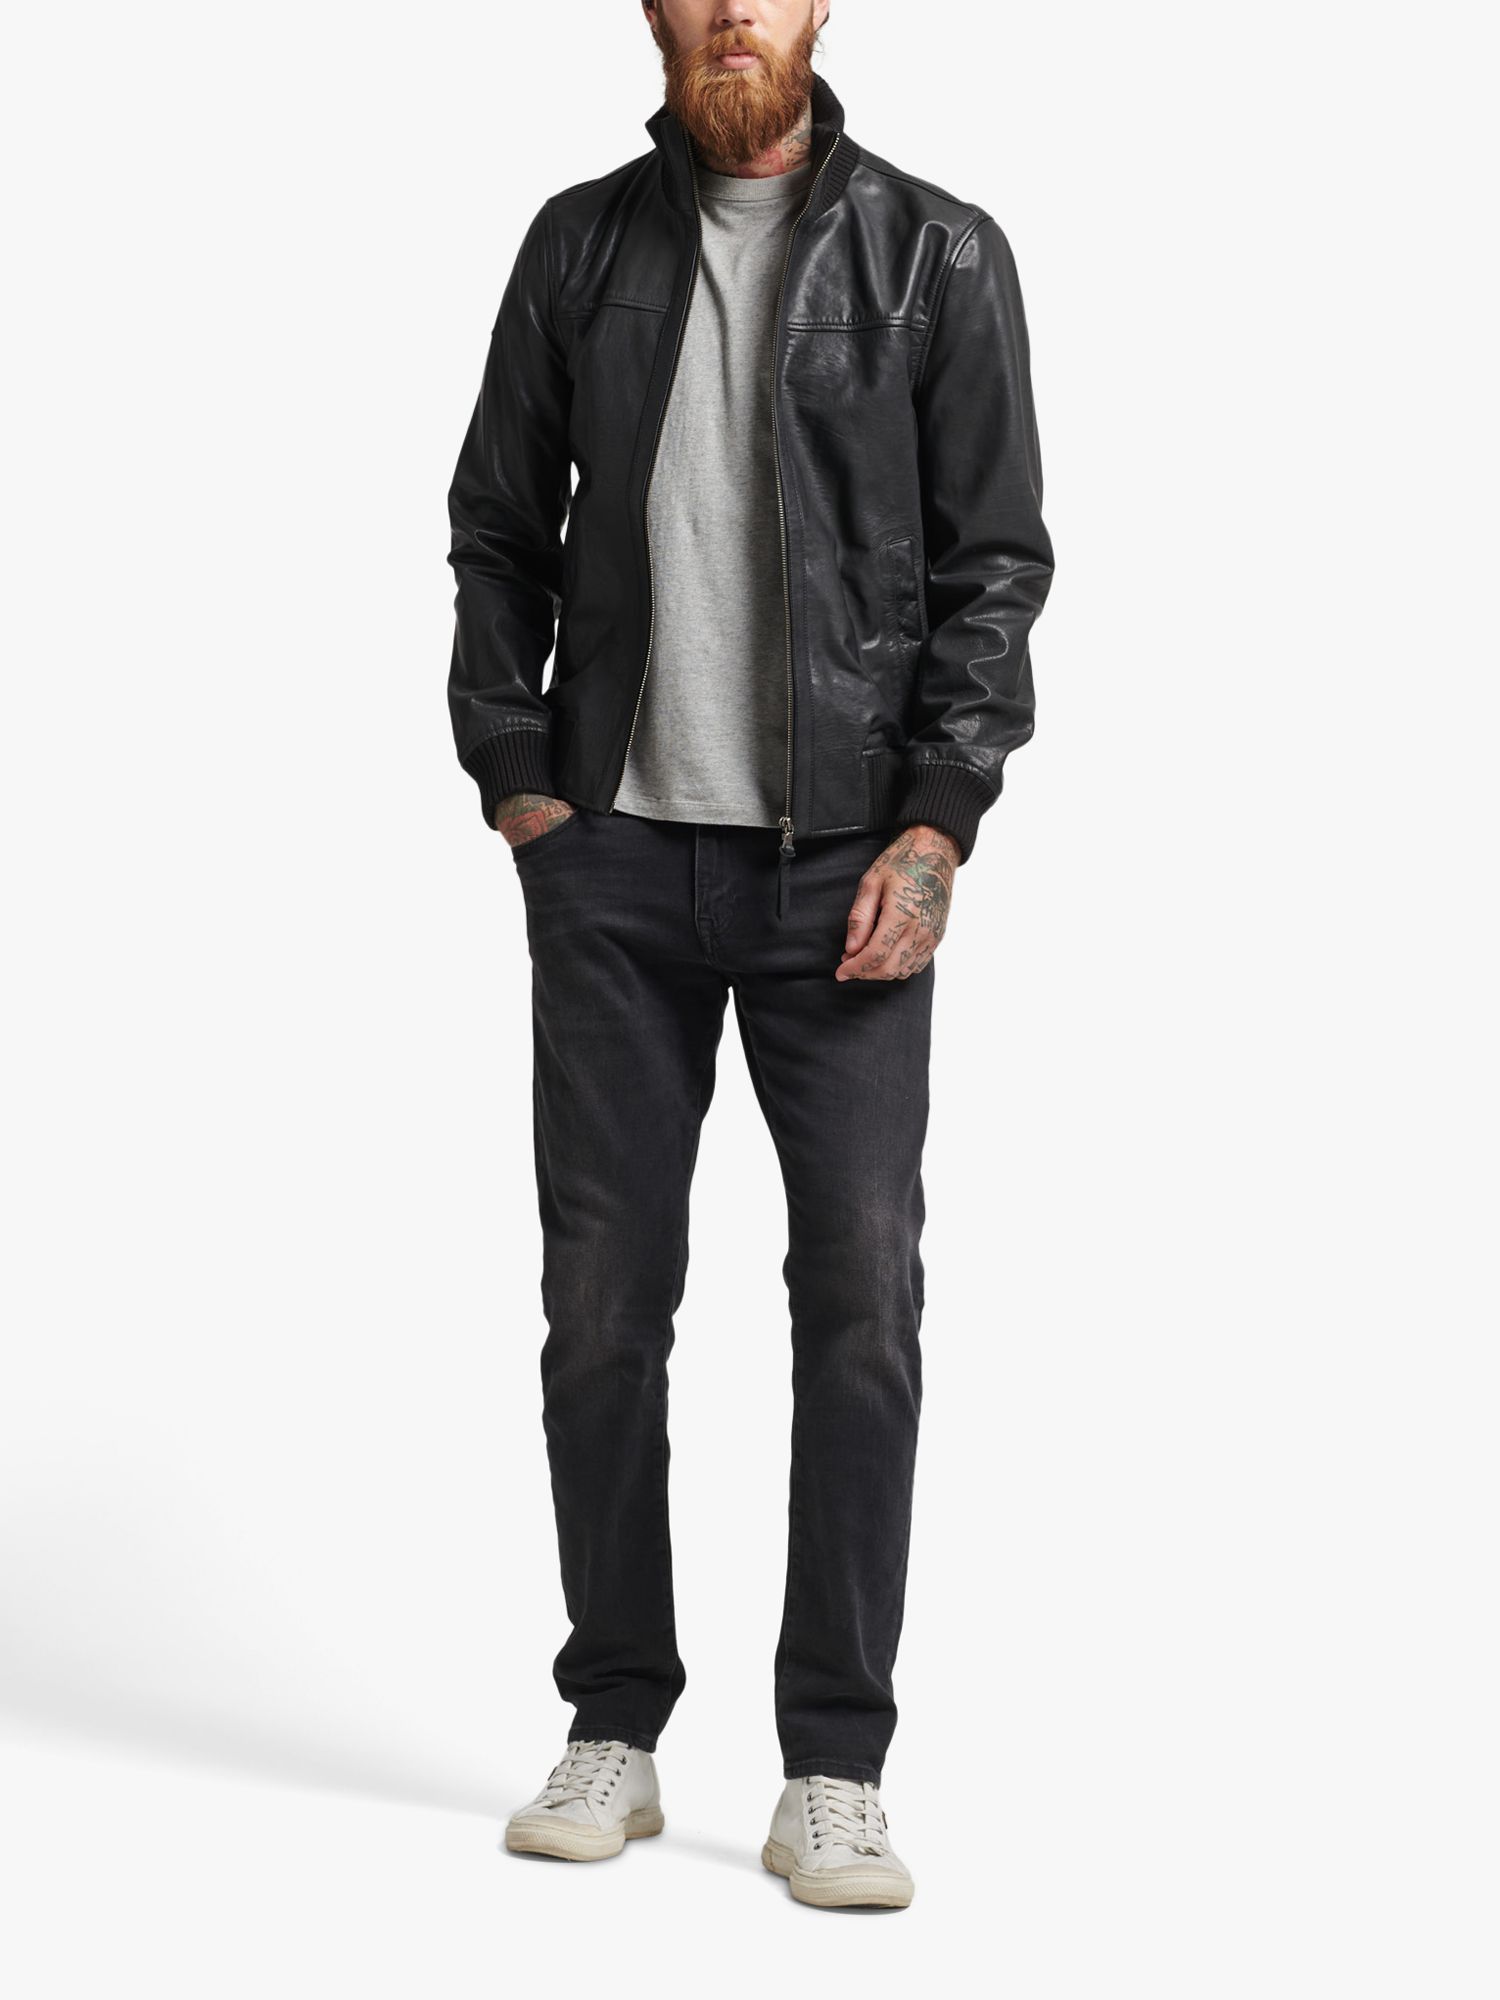 Superdry Knitted Collar Leather Bomber Jacket, Black at John Lewis ...